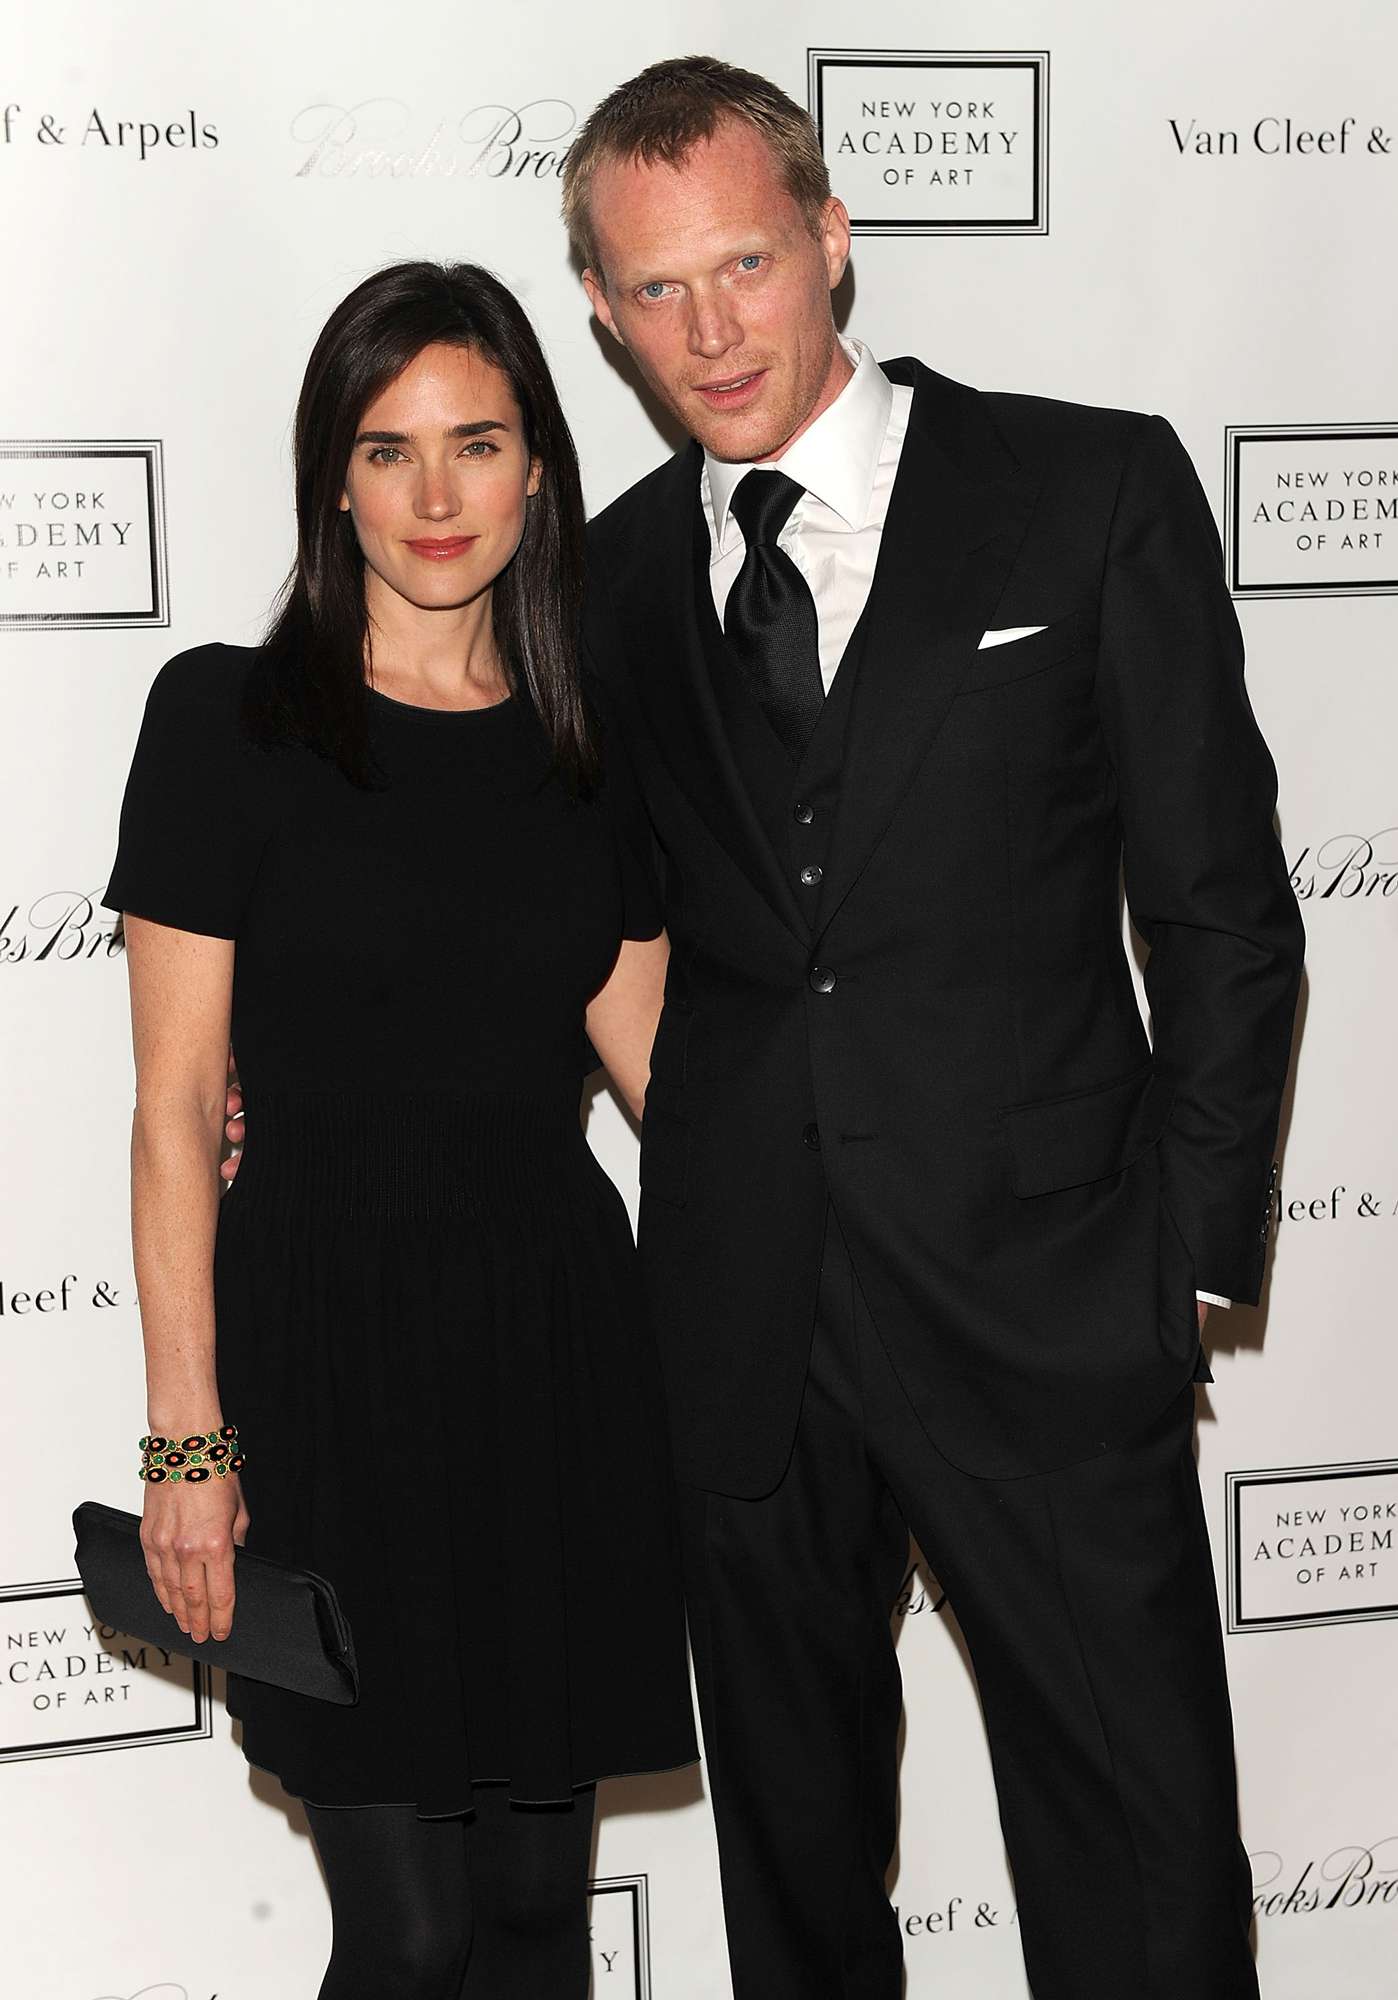 Jennifer Connelly and Paul Bettany pose on the red carpet during the 2010 Tribeca Ball at the New York Academy of Art on April 13, 2010 in New York City